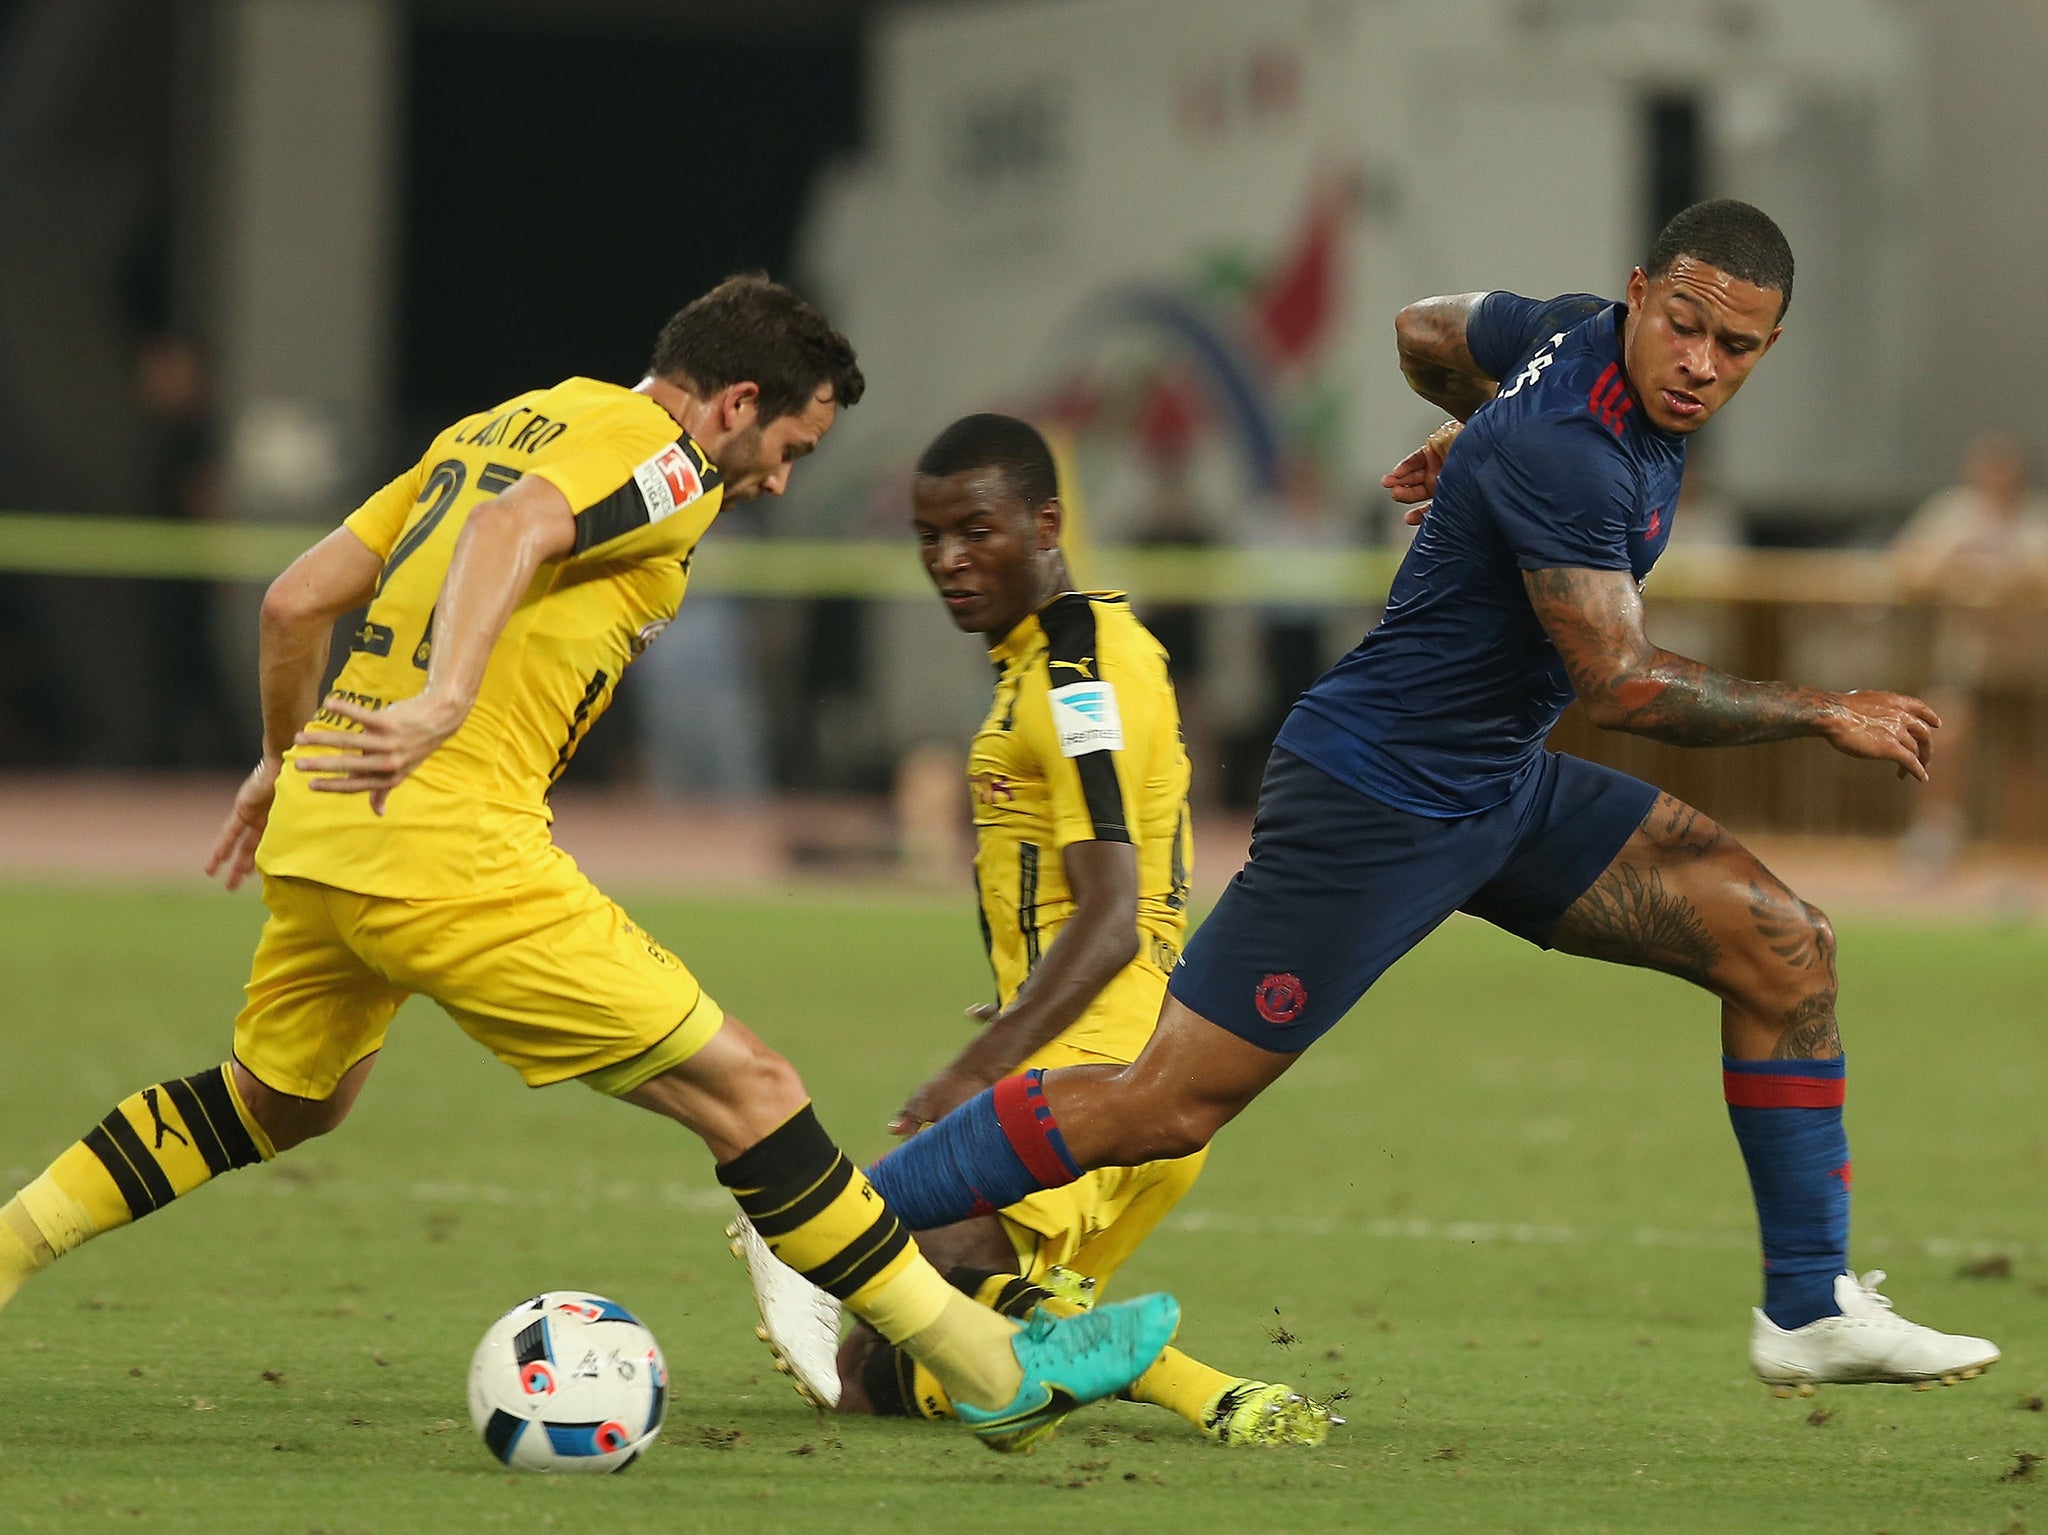 Castro robs Depay, who looked off the pace before being pulled at half-time